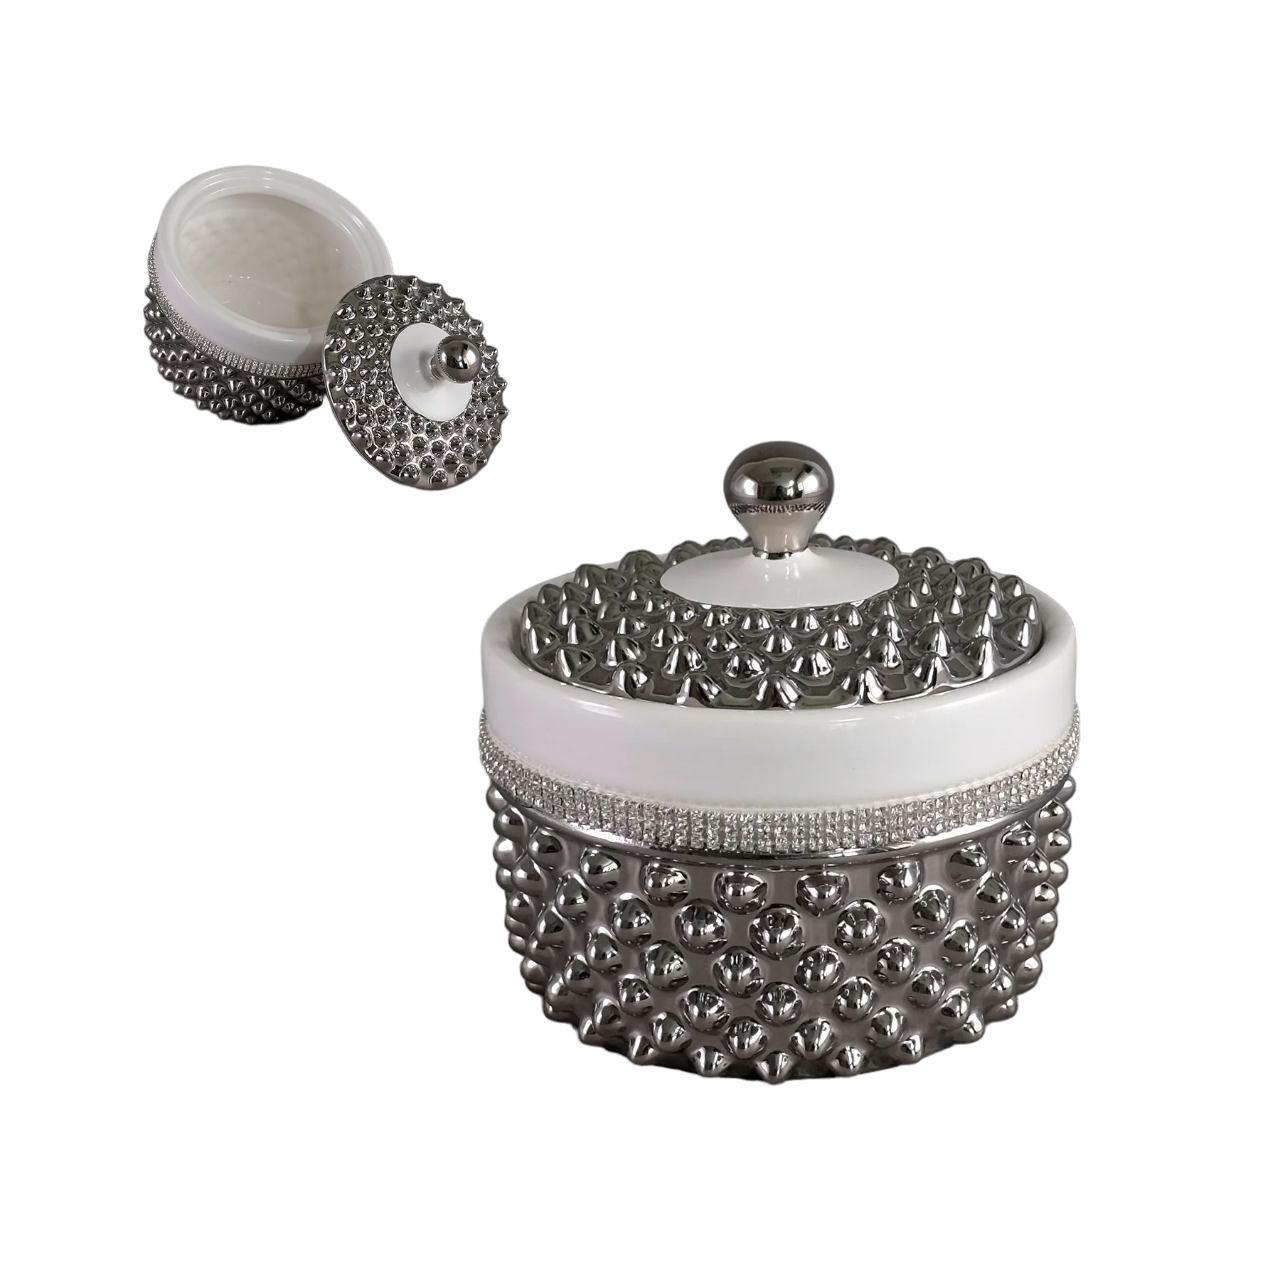 Trinket Box with Crystal 6" round bowl with lid